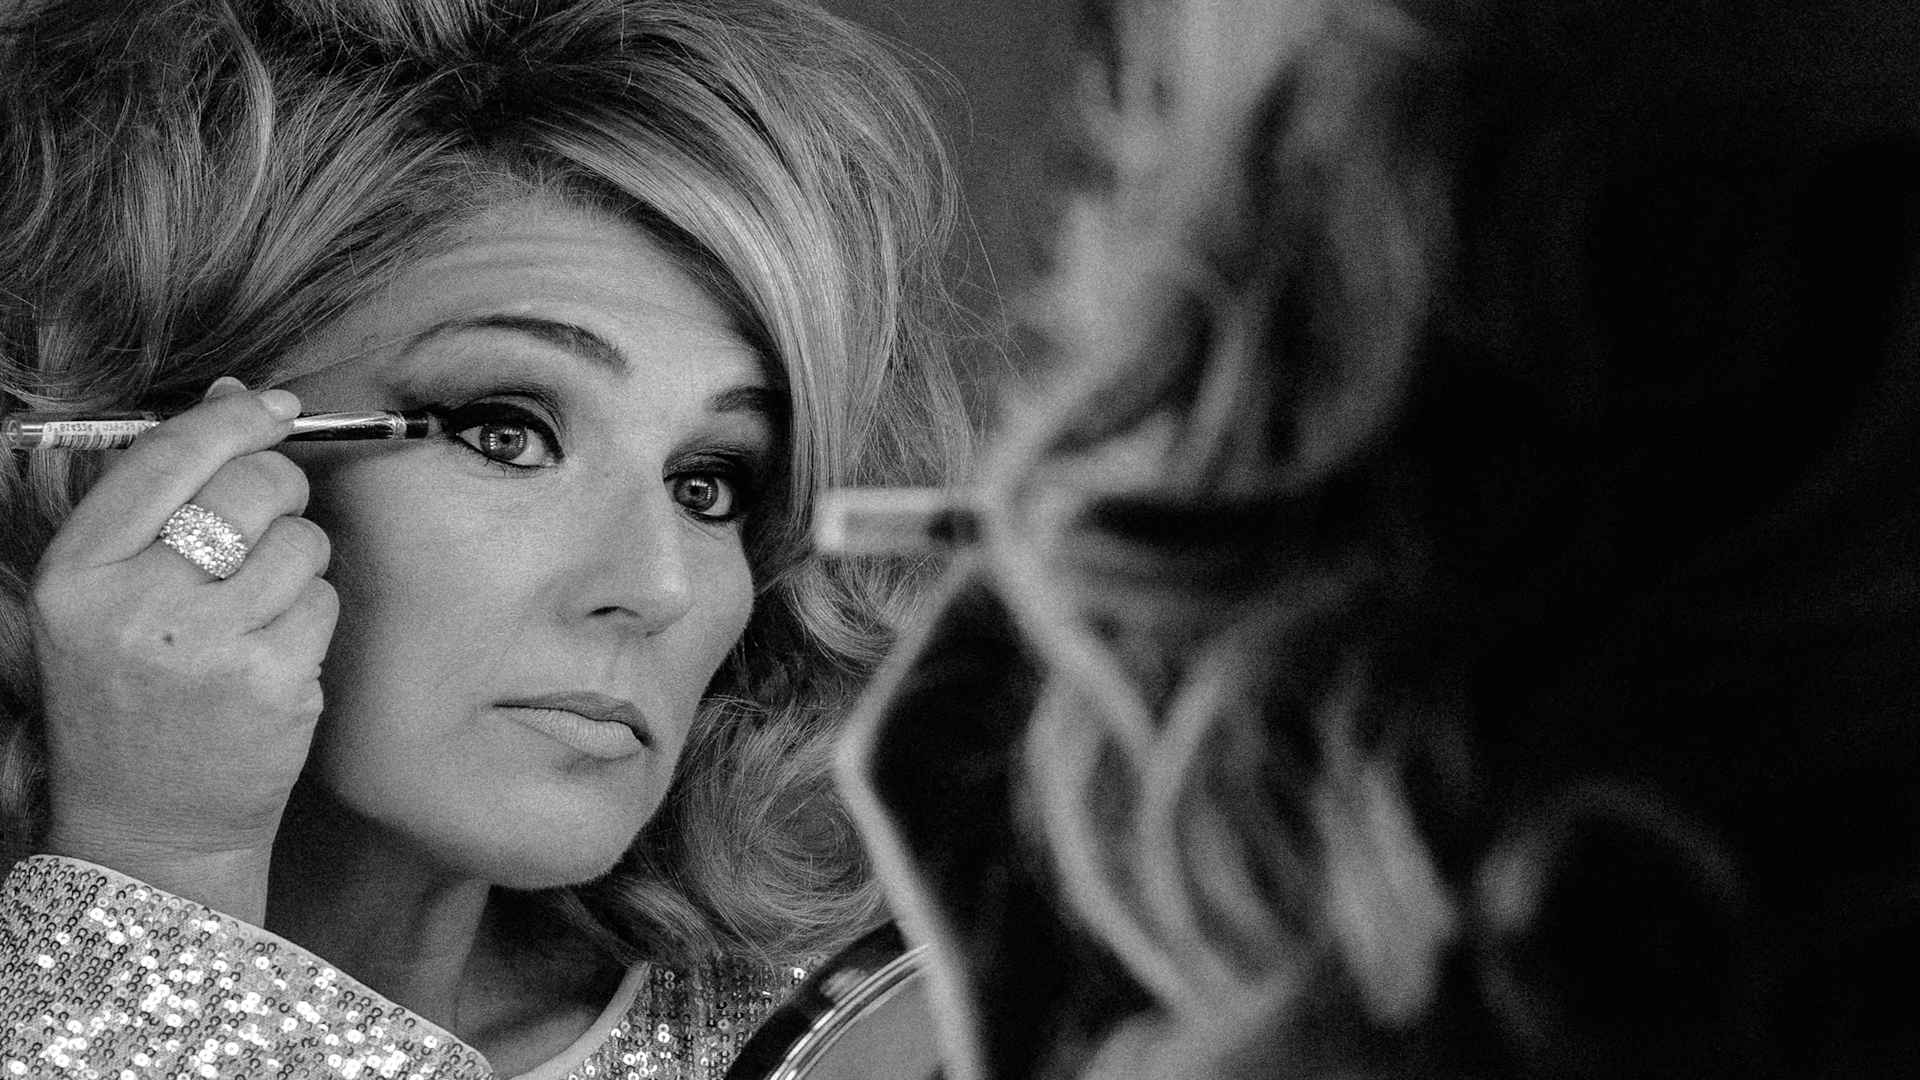 Mazz Murray: The Music of Dusty Springfield